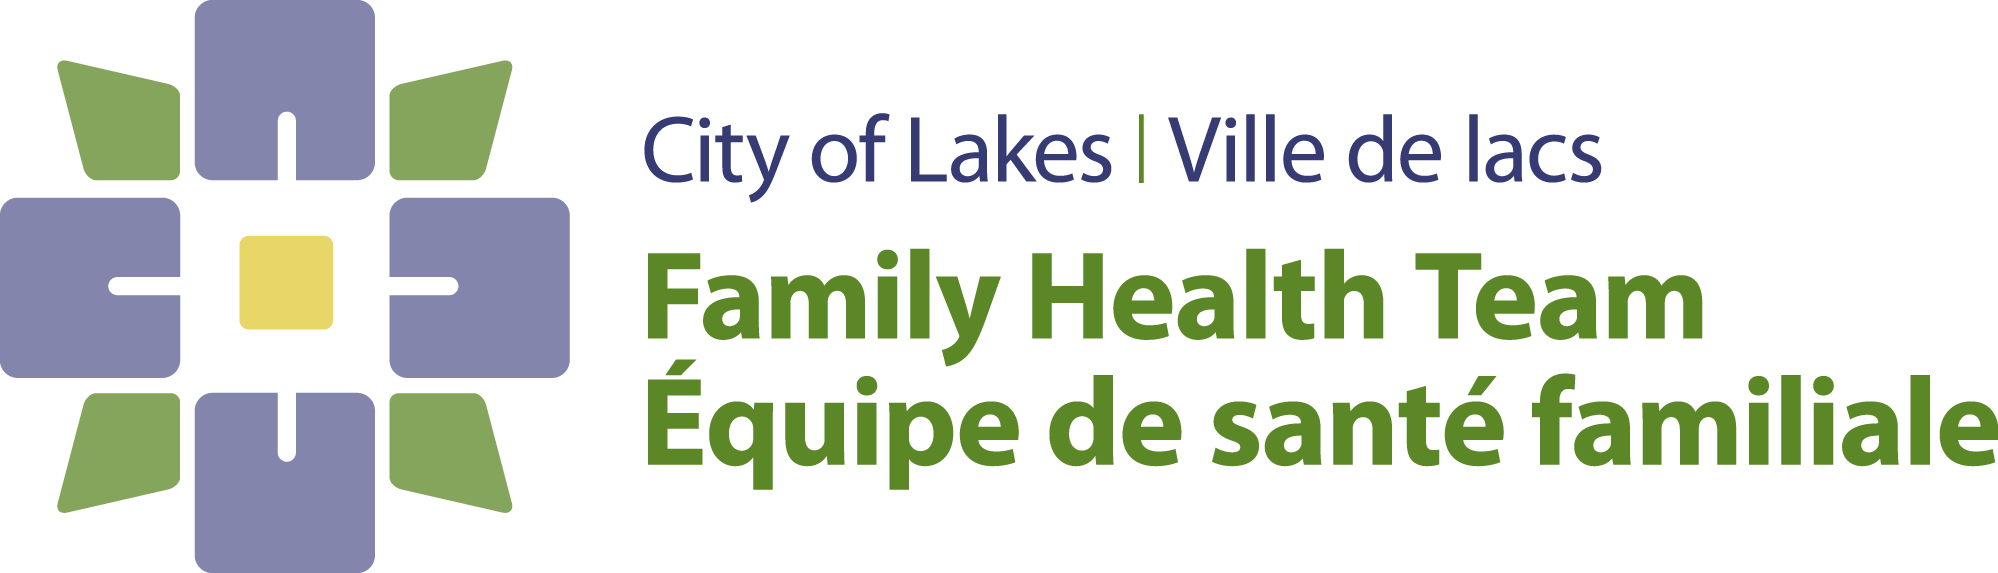 City of Lakes FHT logo